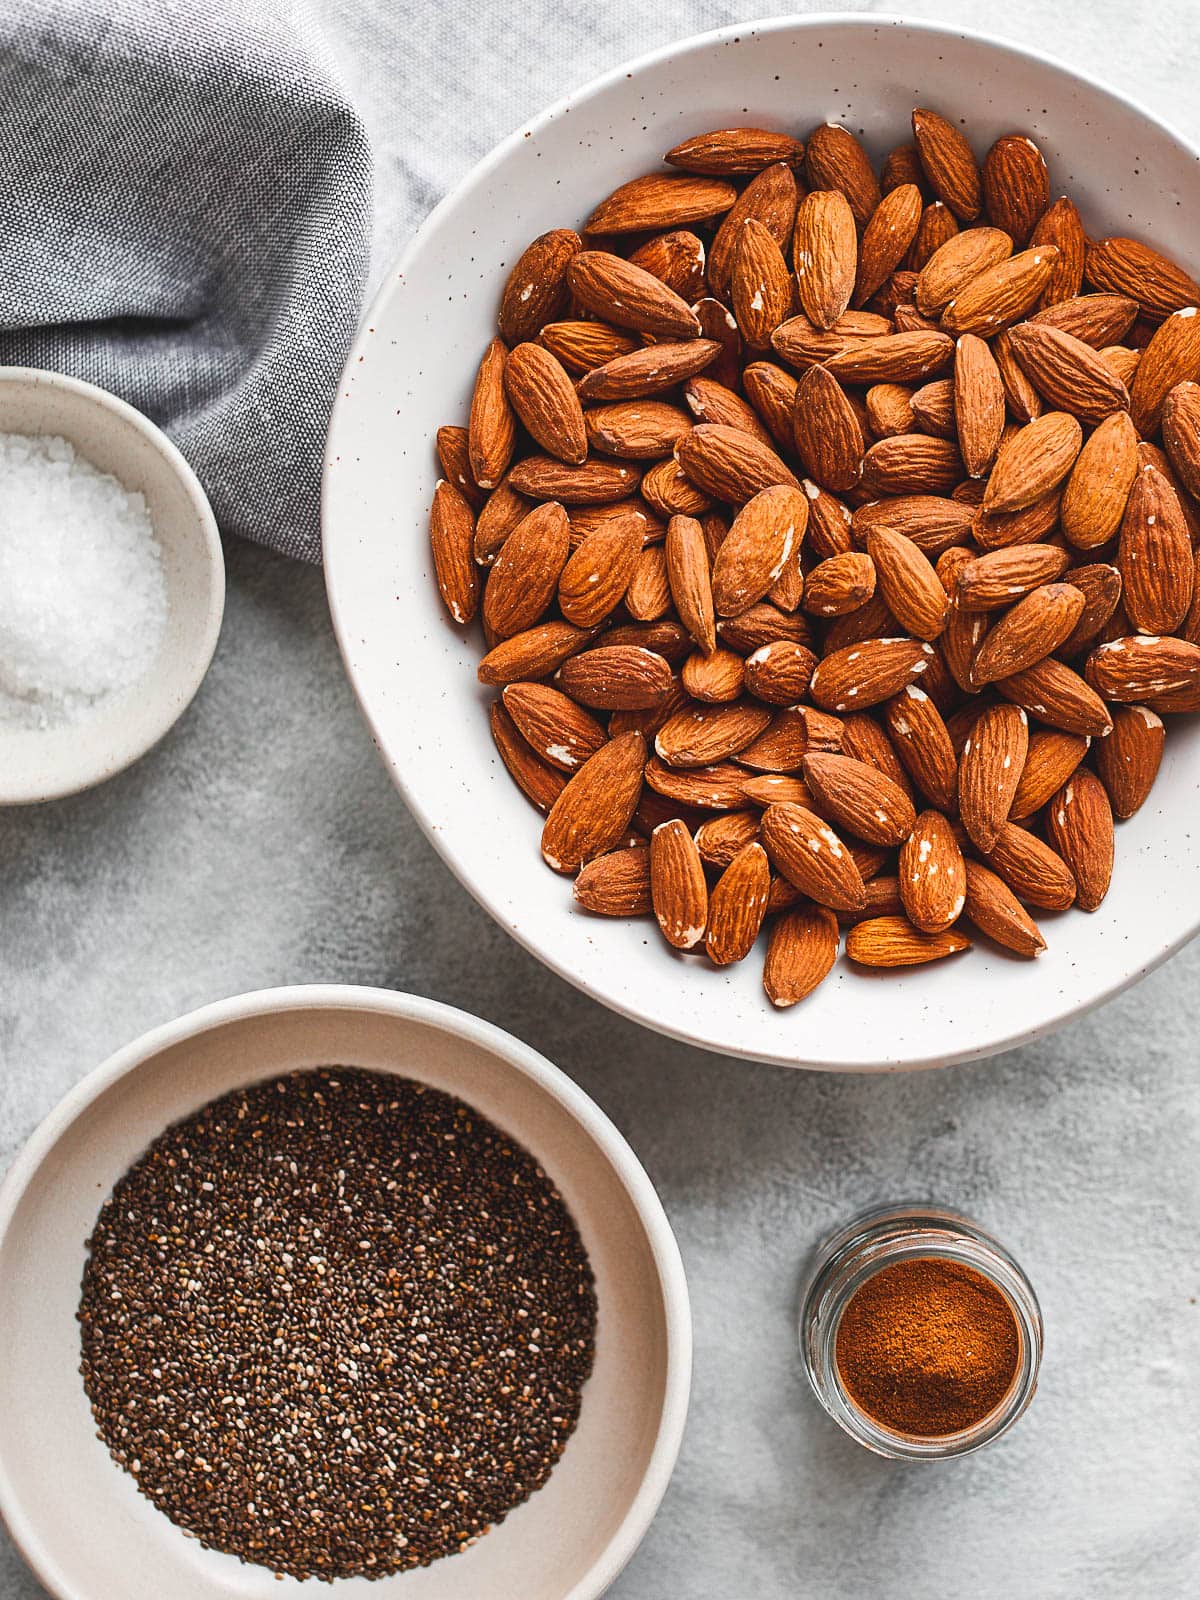 Ingredients for almond chia seed butter